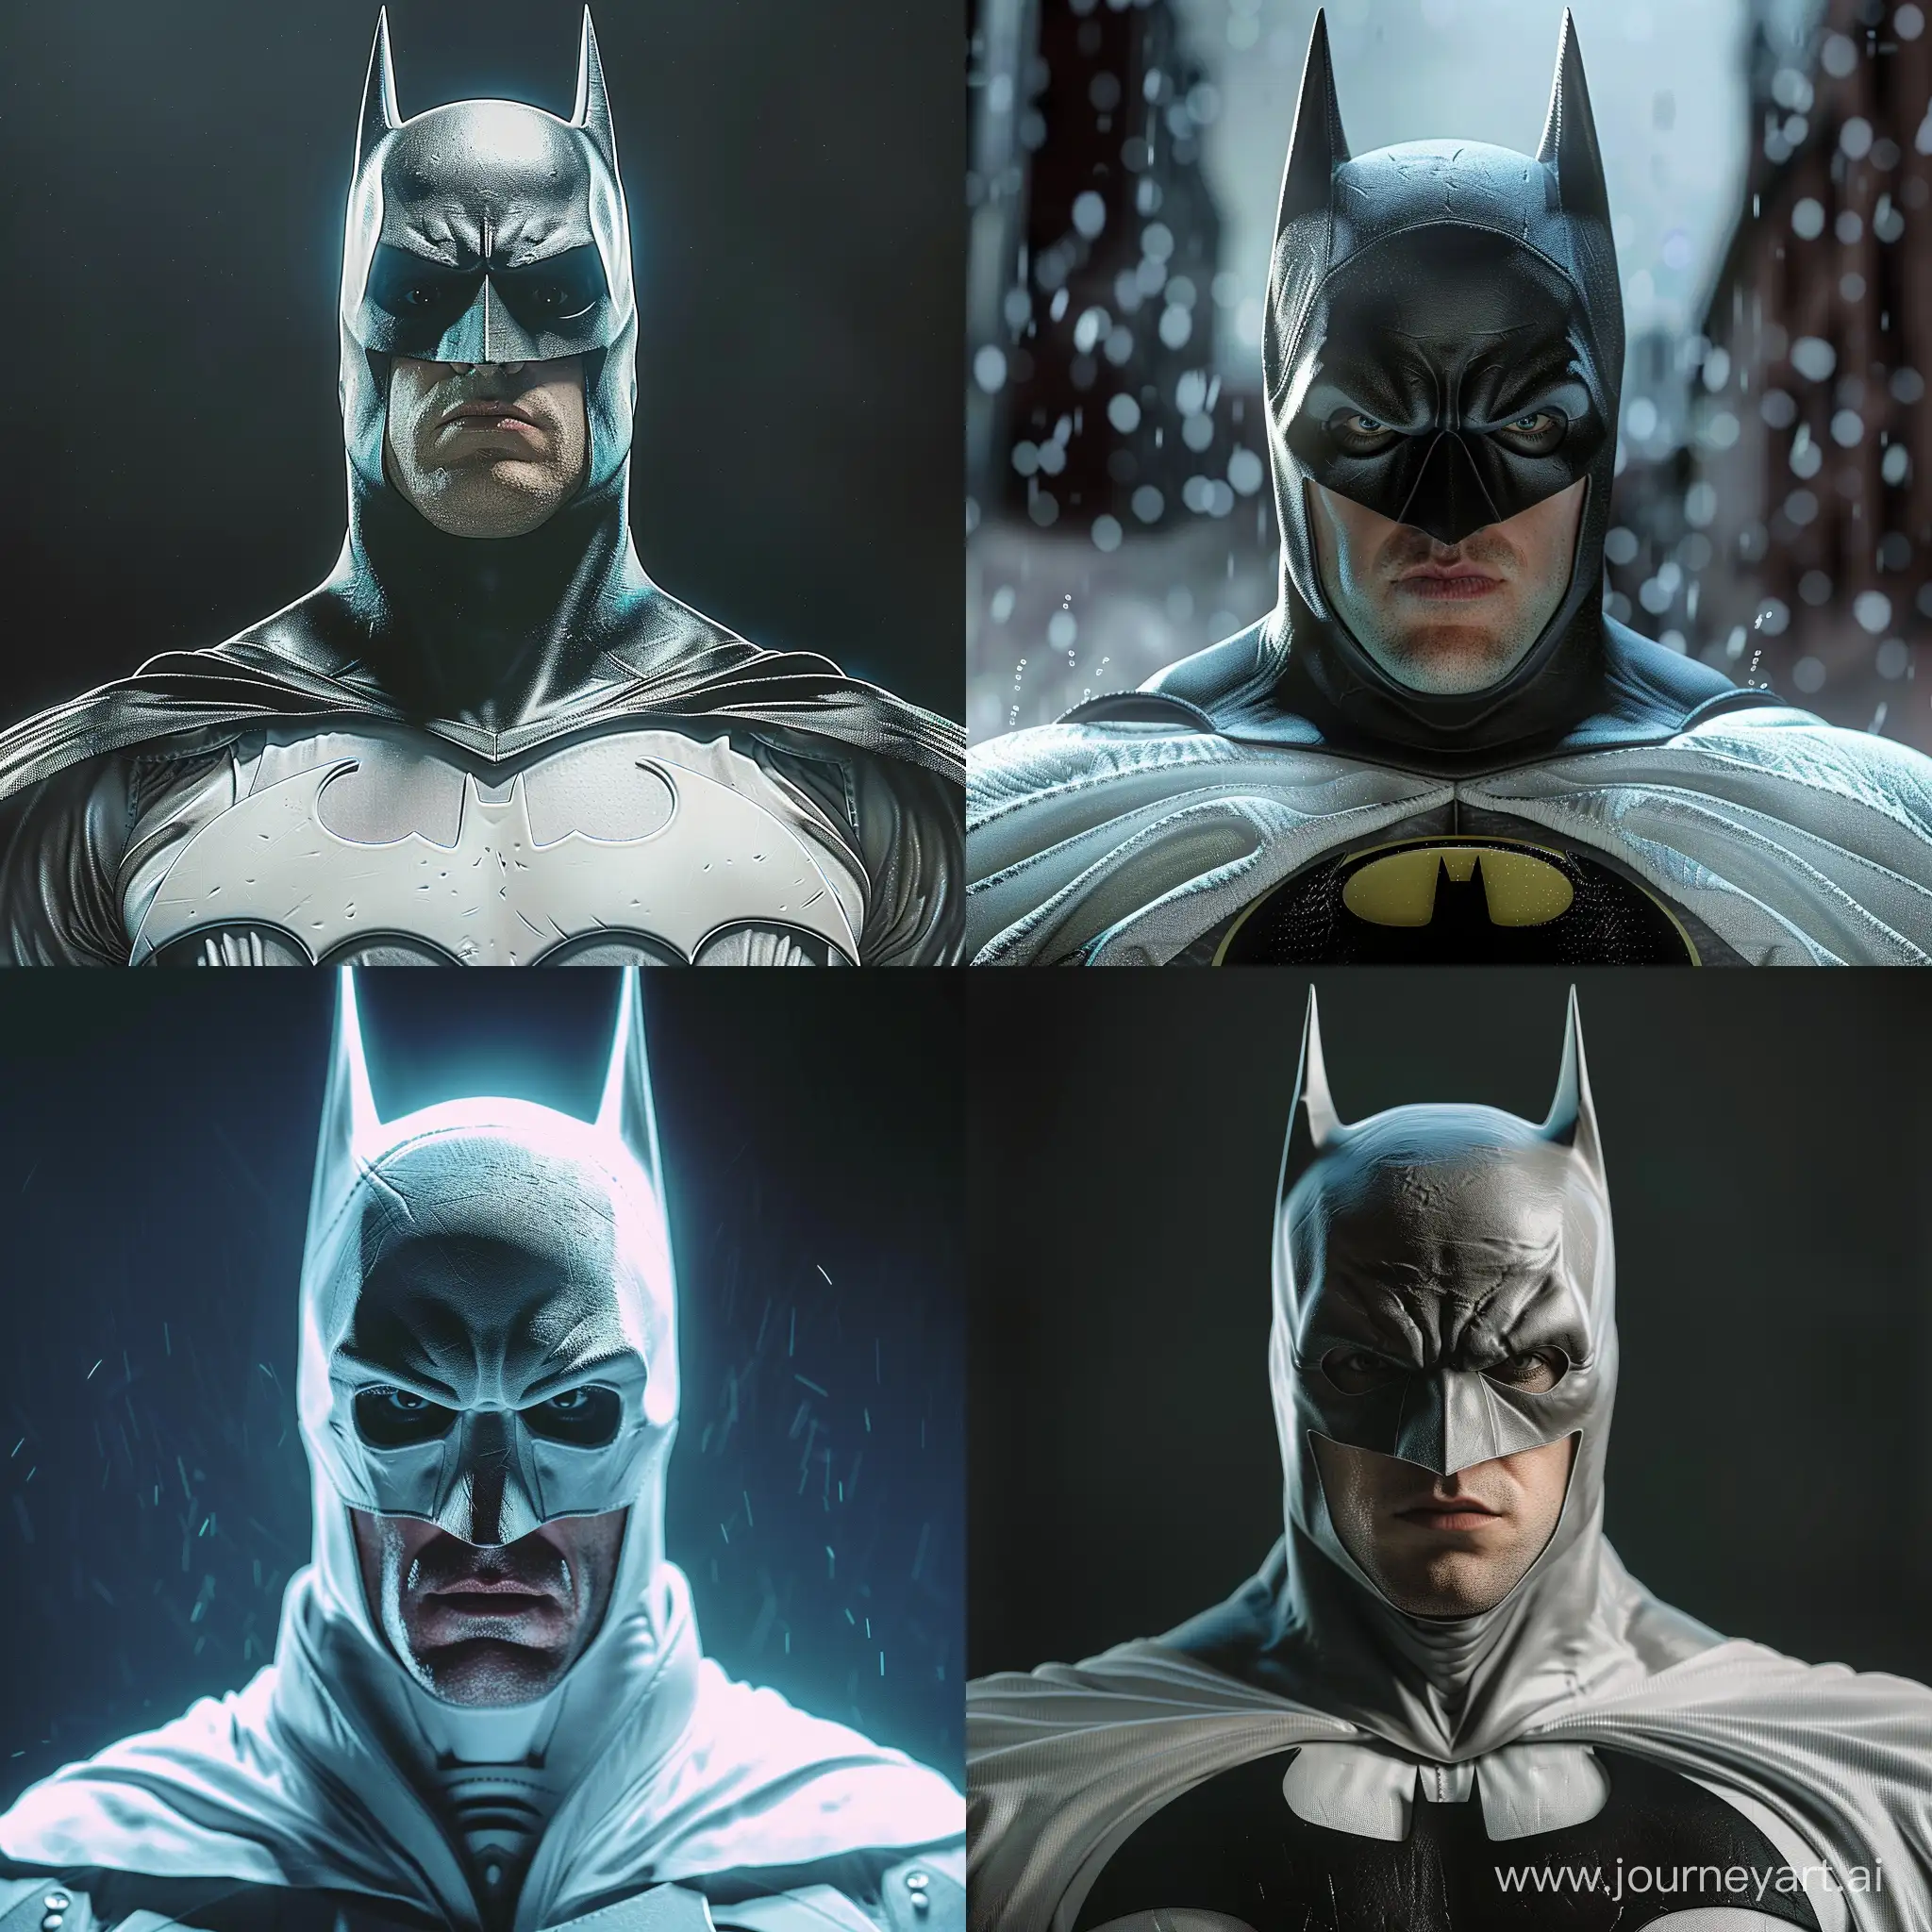 Christian Bale as Batman in White ultra-realistic, high resolution, with cinematic lighting